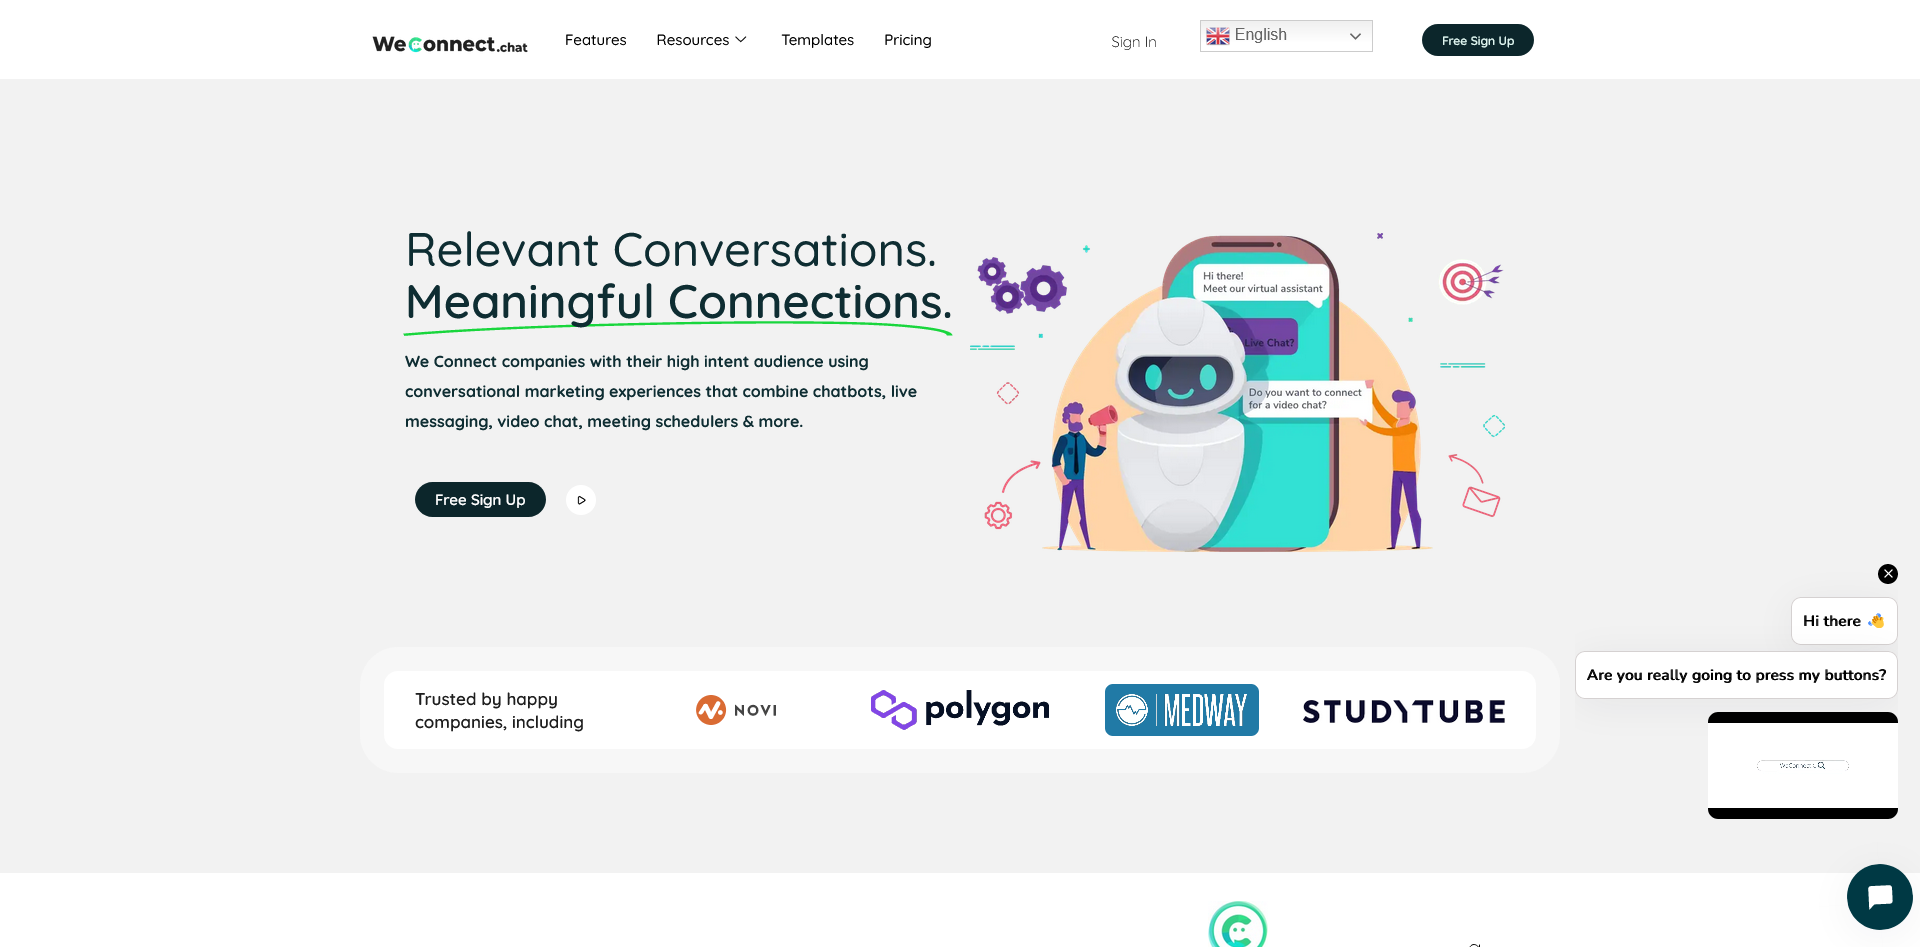 Building a WordPress Website for WeConnect.chat: A Case Study